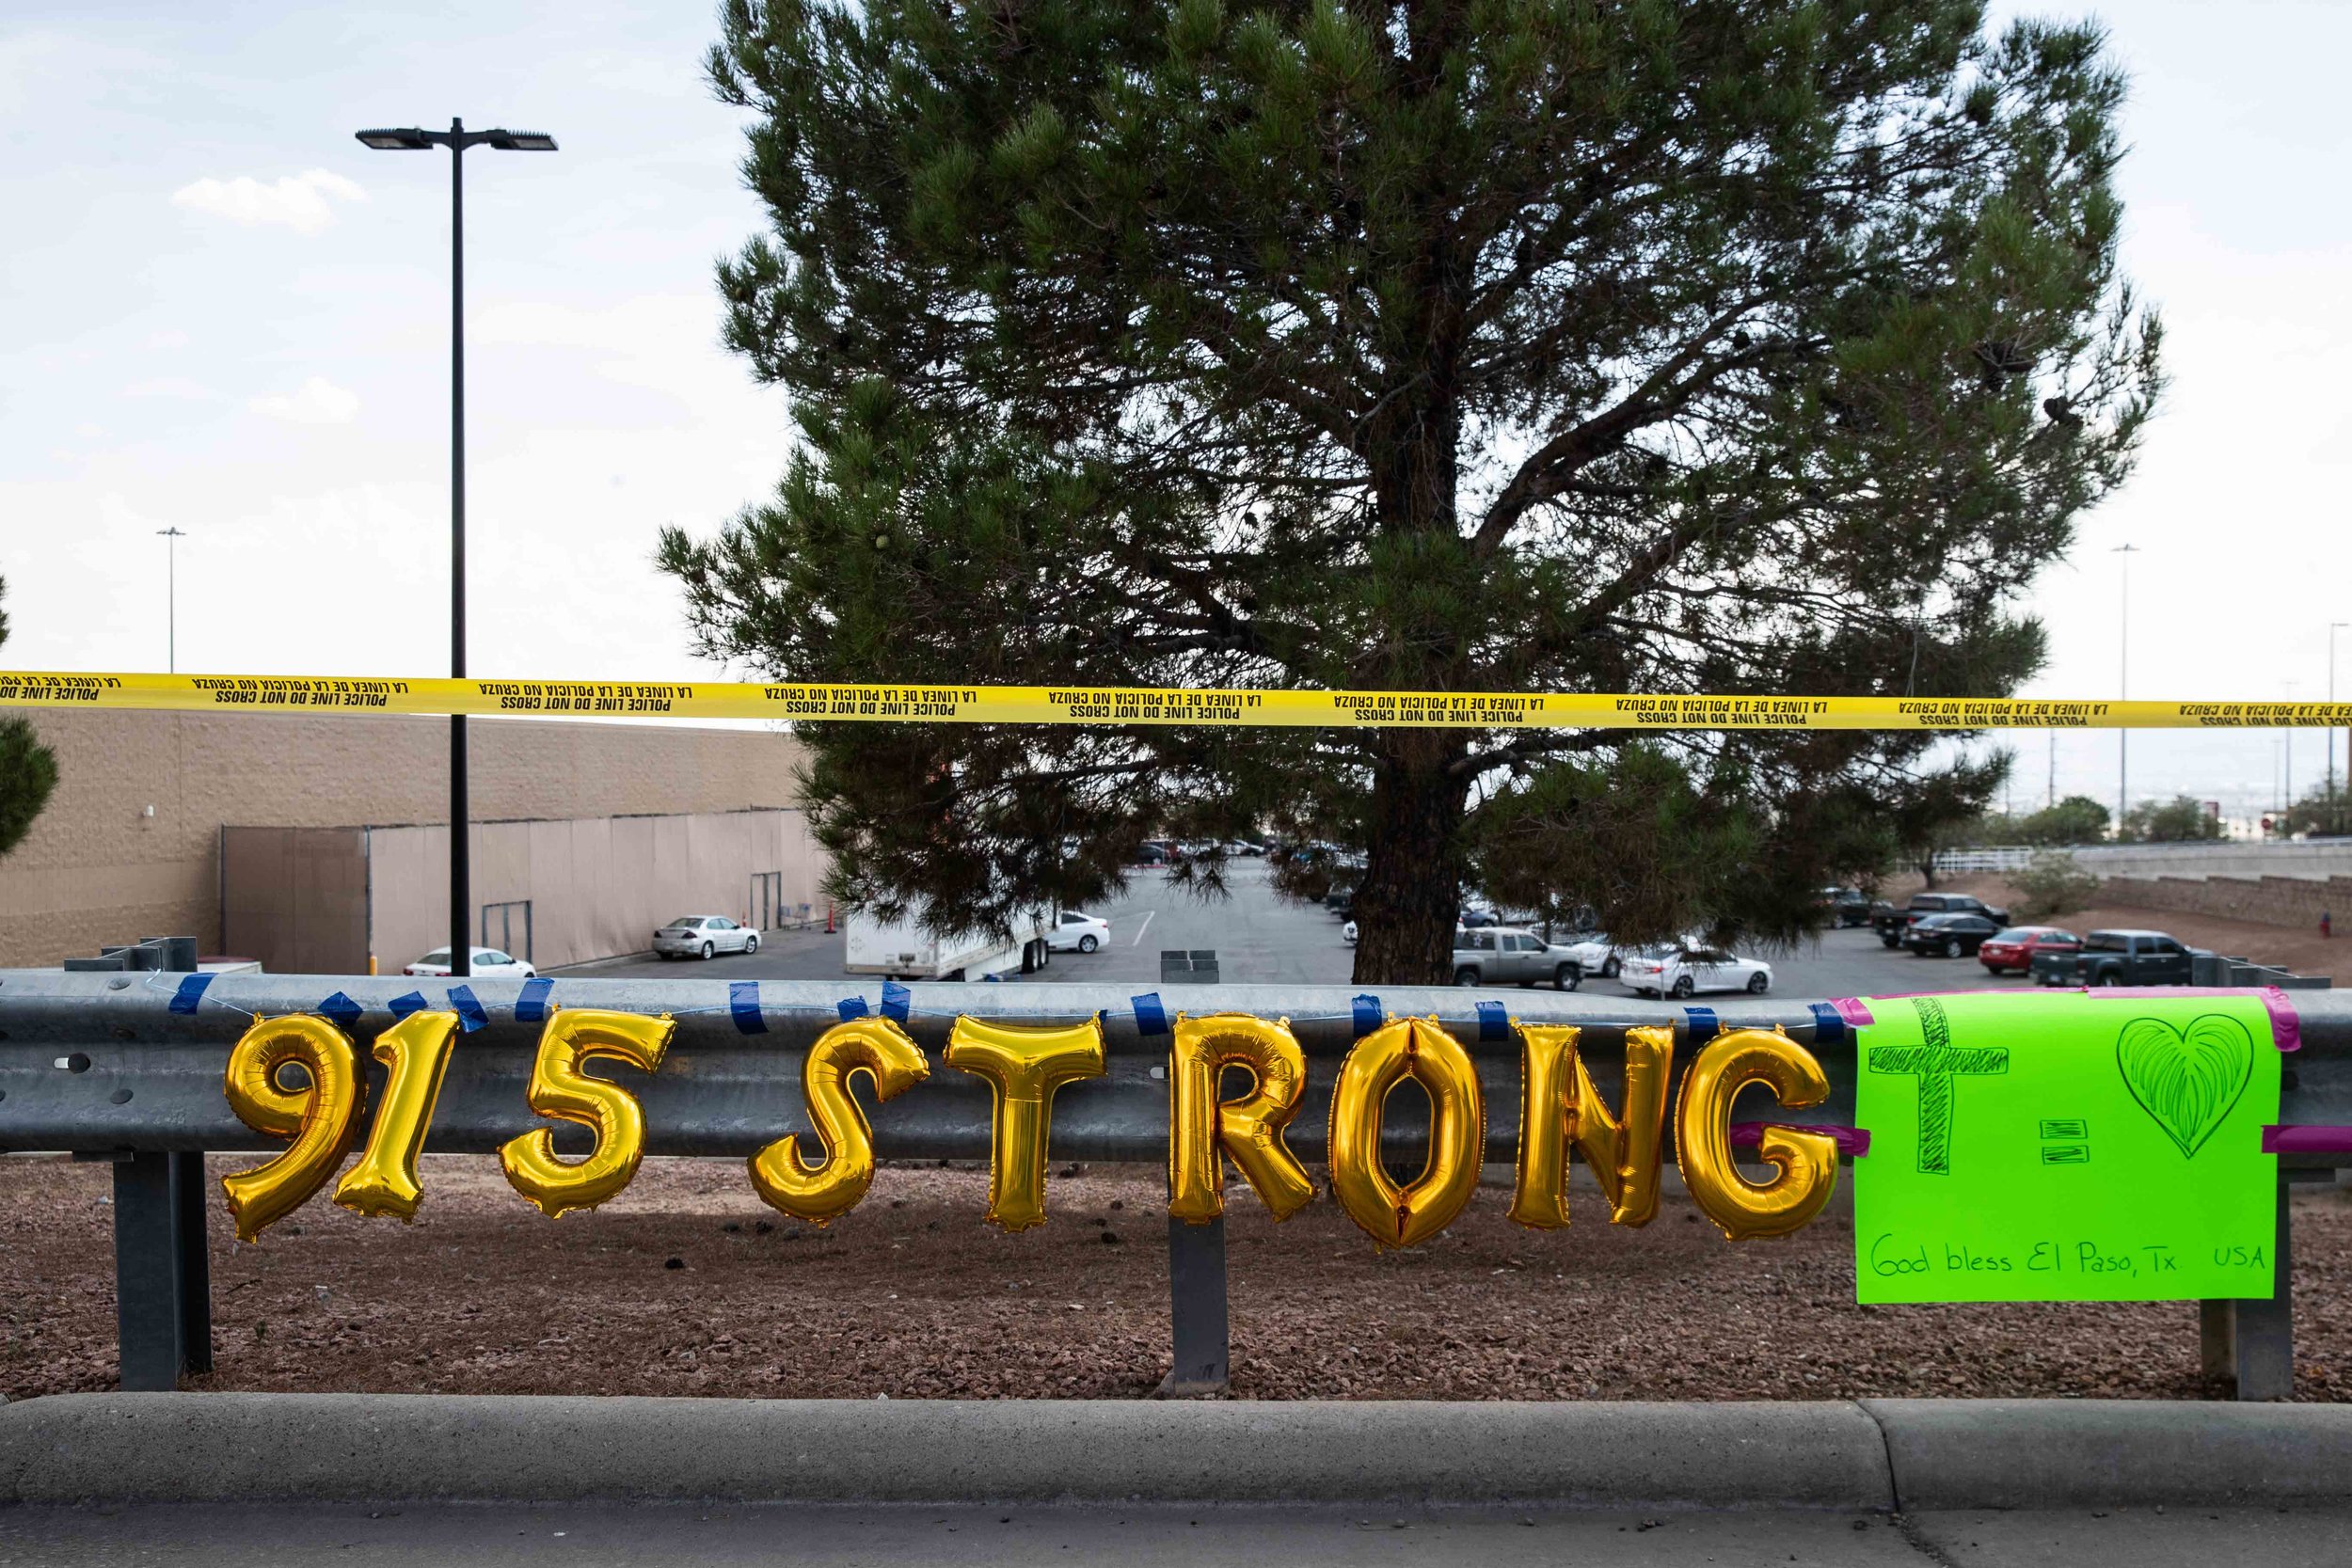  El Paso area code 915 and the word "strong" spelled with golden balloons are placed on the scene where a mass shooting occurred in Walmart last Saturday morning to honor their memory in El Paso on Monday, August 5, 2019. 